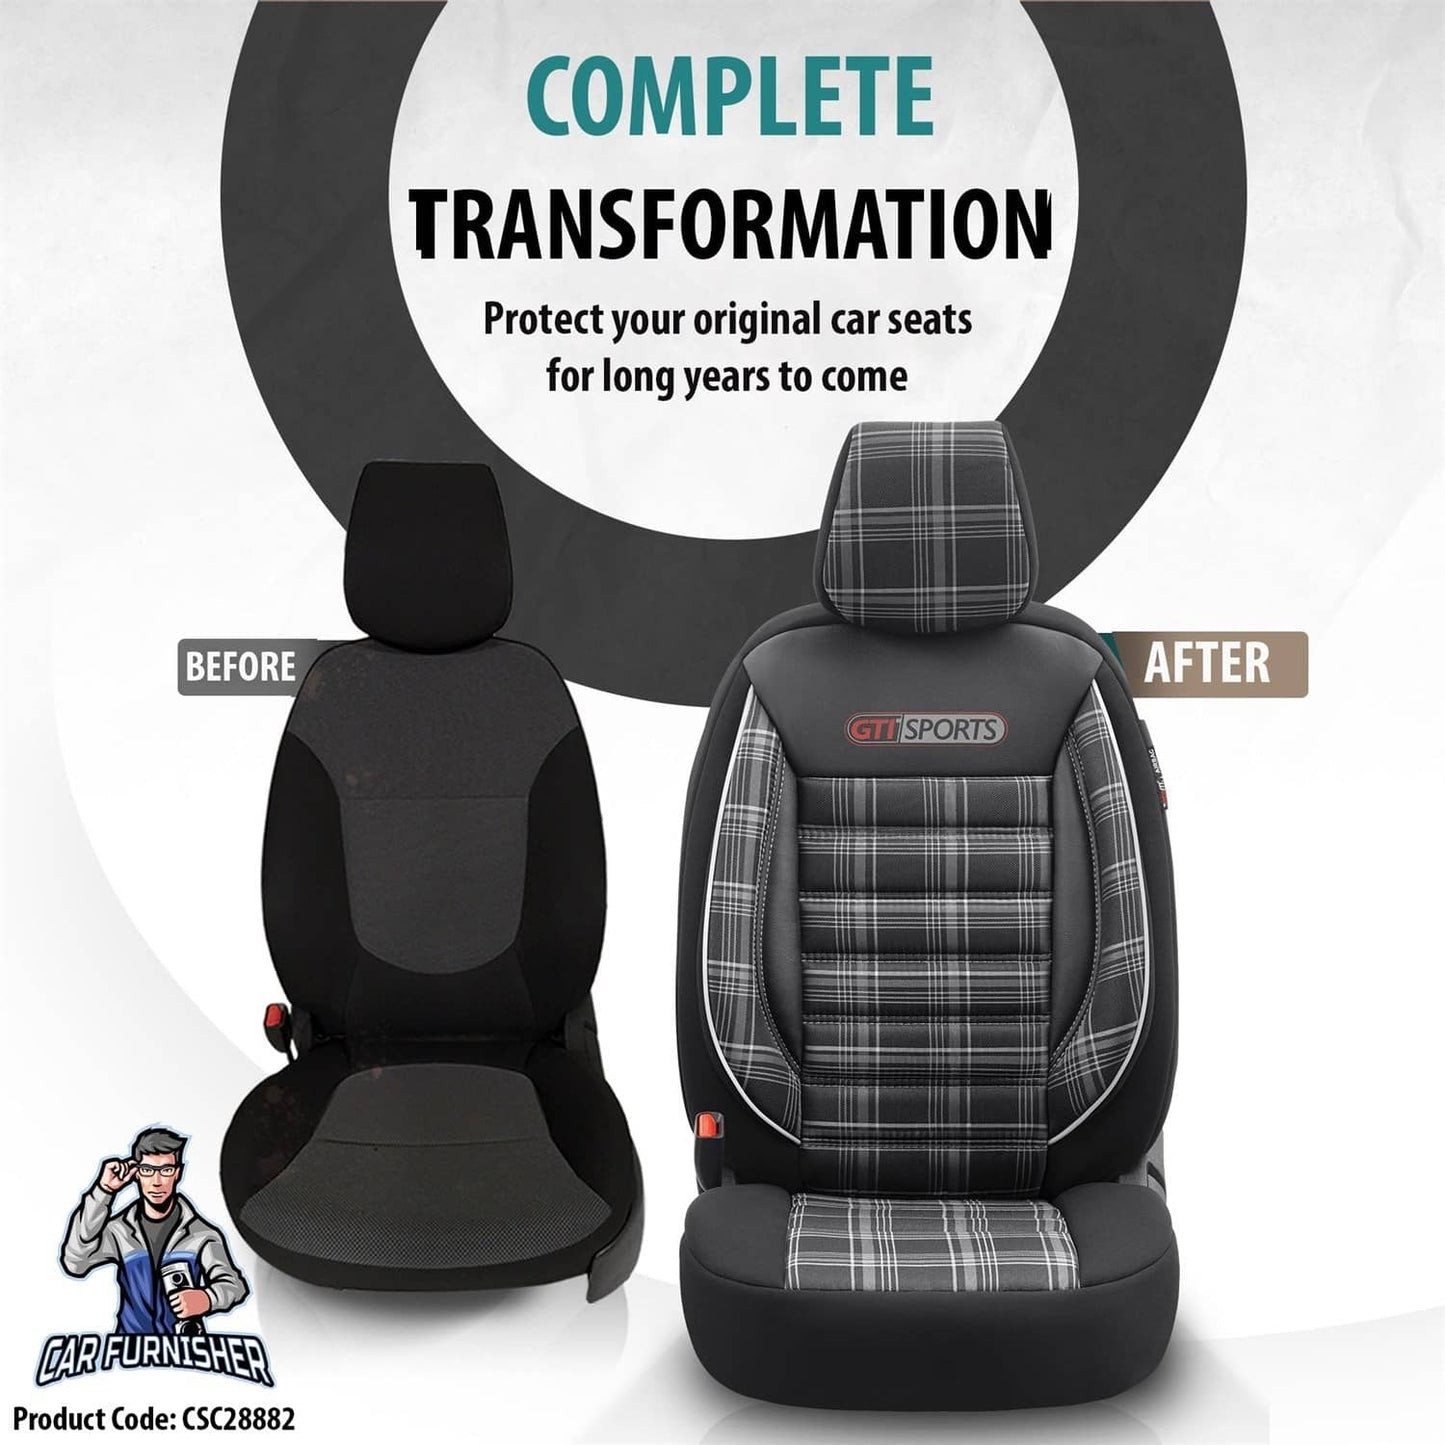 VW Golf GTI Car Seat Covers MK4/MK5/MK6/MK7 1998-2020 Special Series Smoked Black 5 Seats + Headrests (Full Set) Leather & Fabric